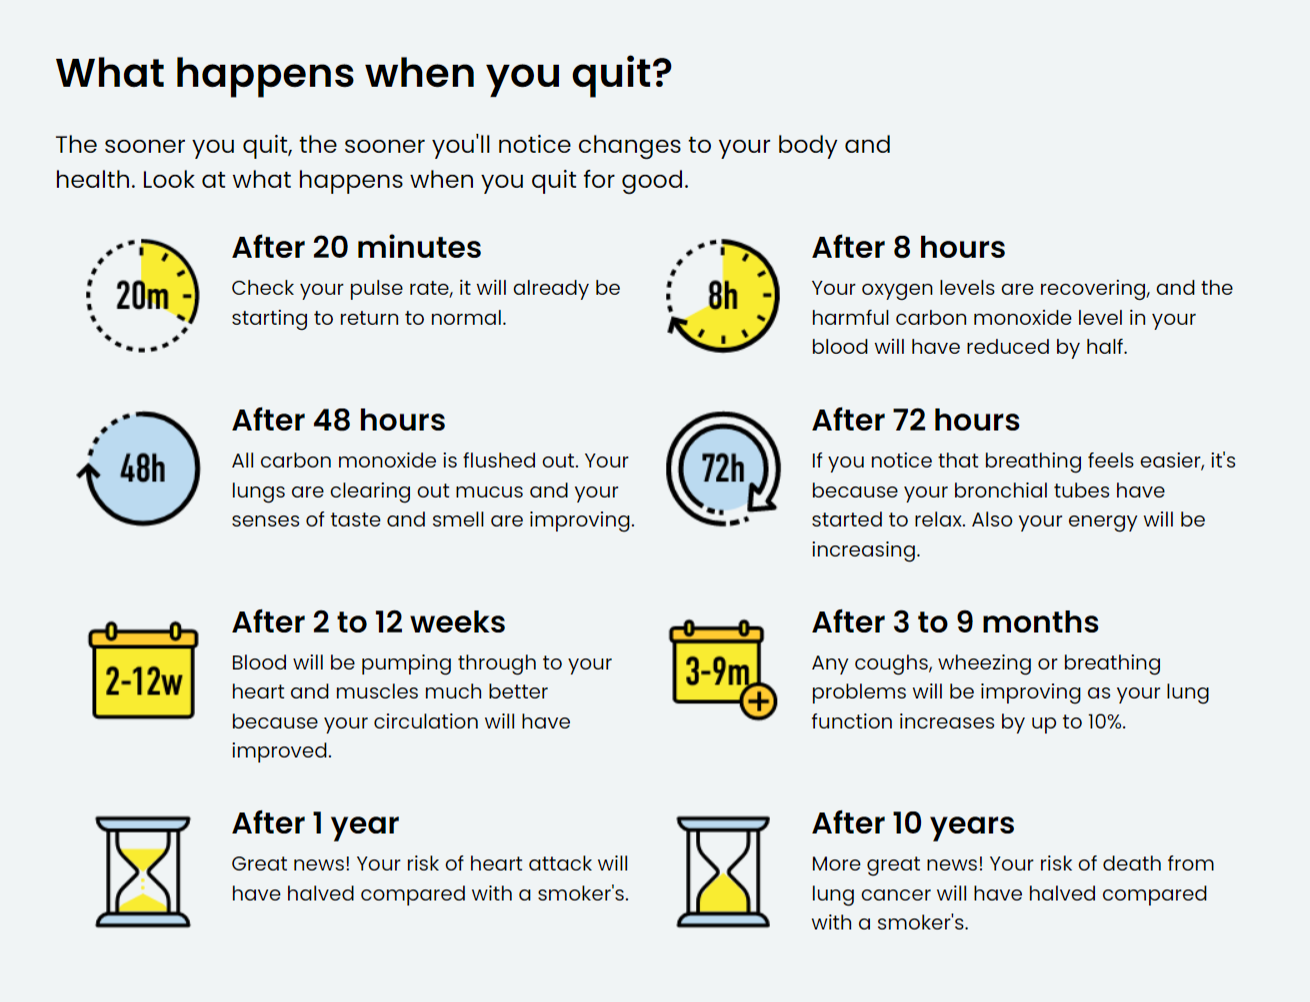 What happens when you quit smoking